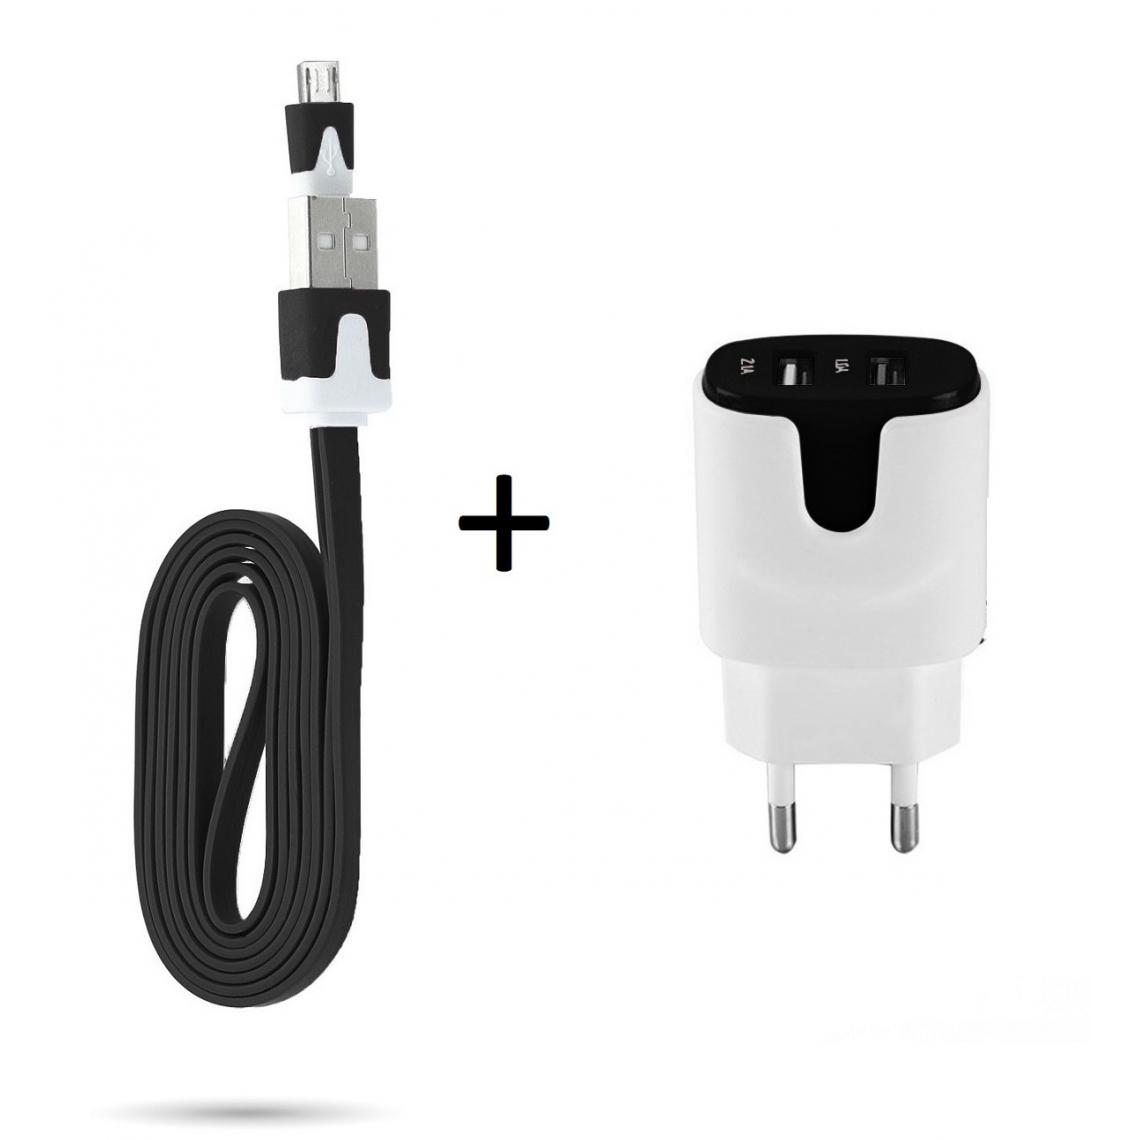 Shot - Pack Chargeur pour WIKO Y60 Smartphone Micro USB (Cable Noodle 1m Chargeur + Double Prise Secteur Couleur USB) (NOIR) - Chargeur secteur téléphone